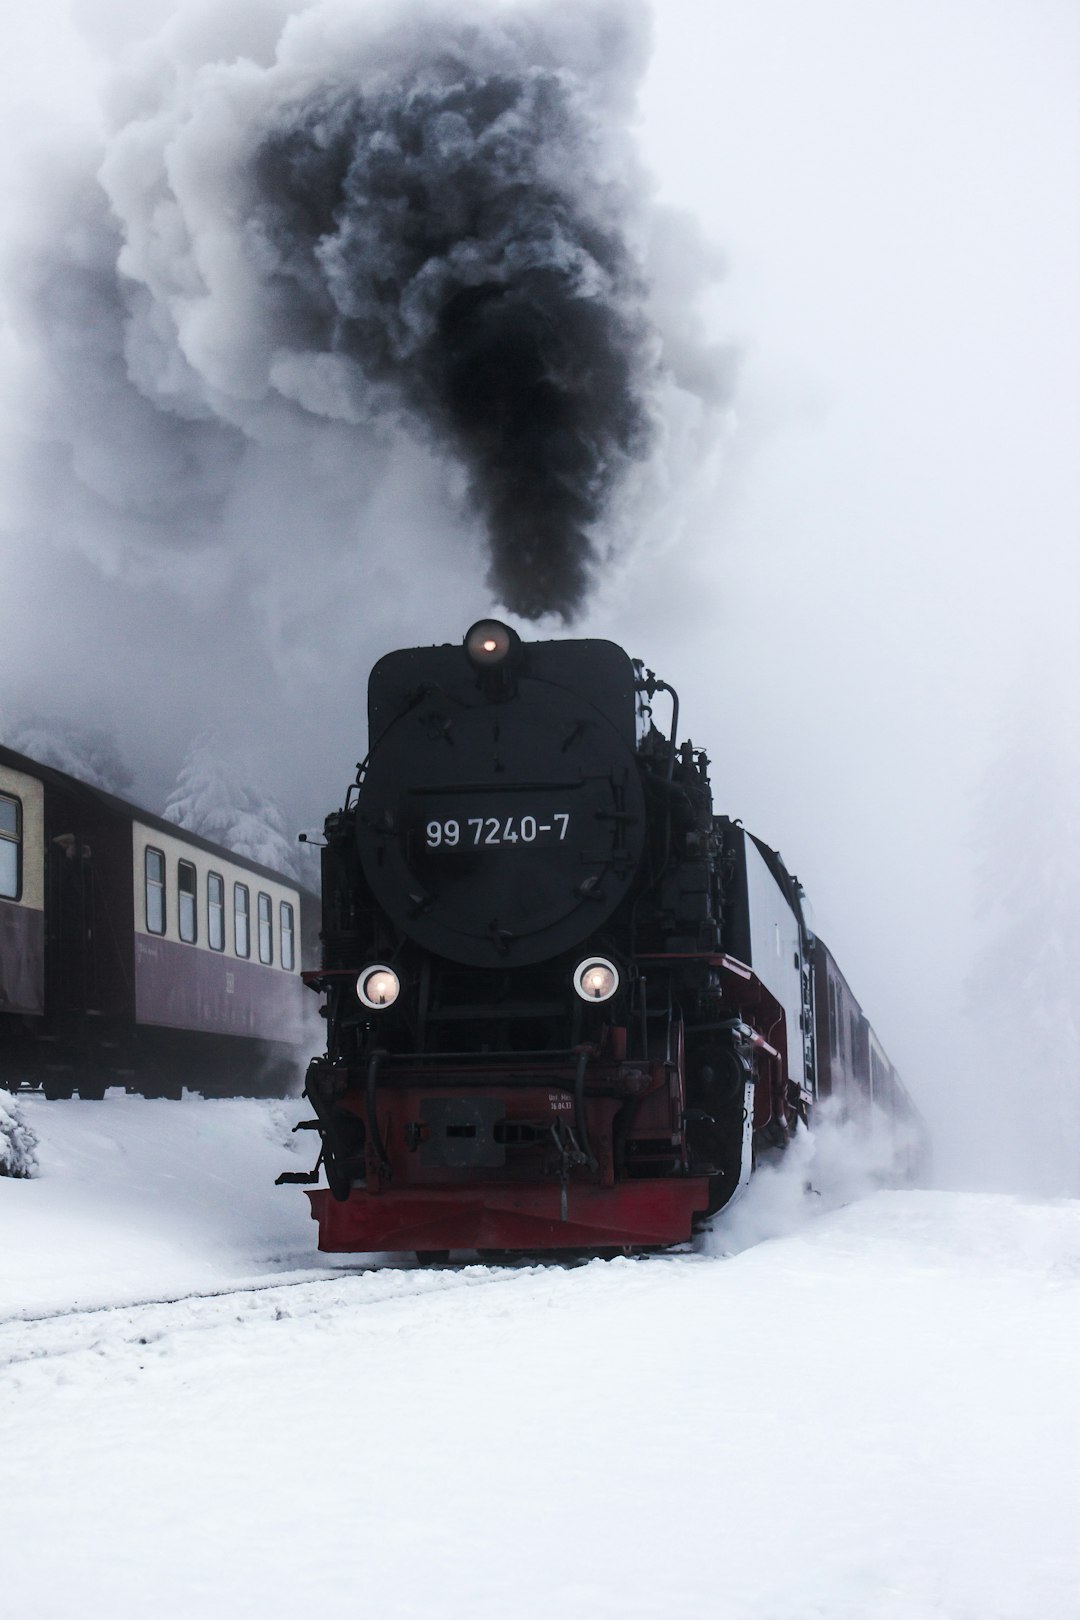 black and red train on snow covered ground during daytime